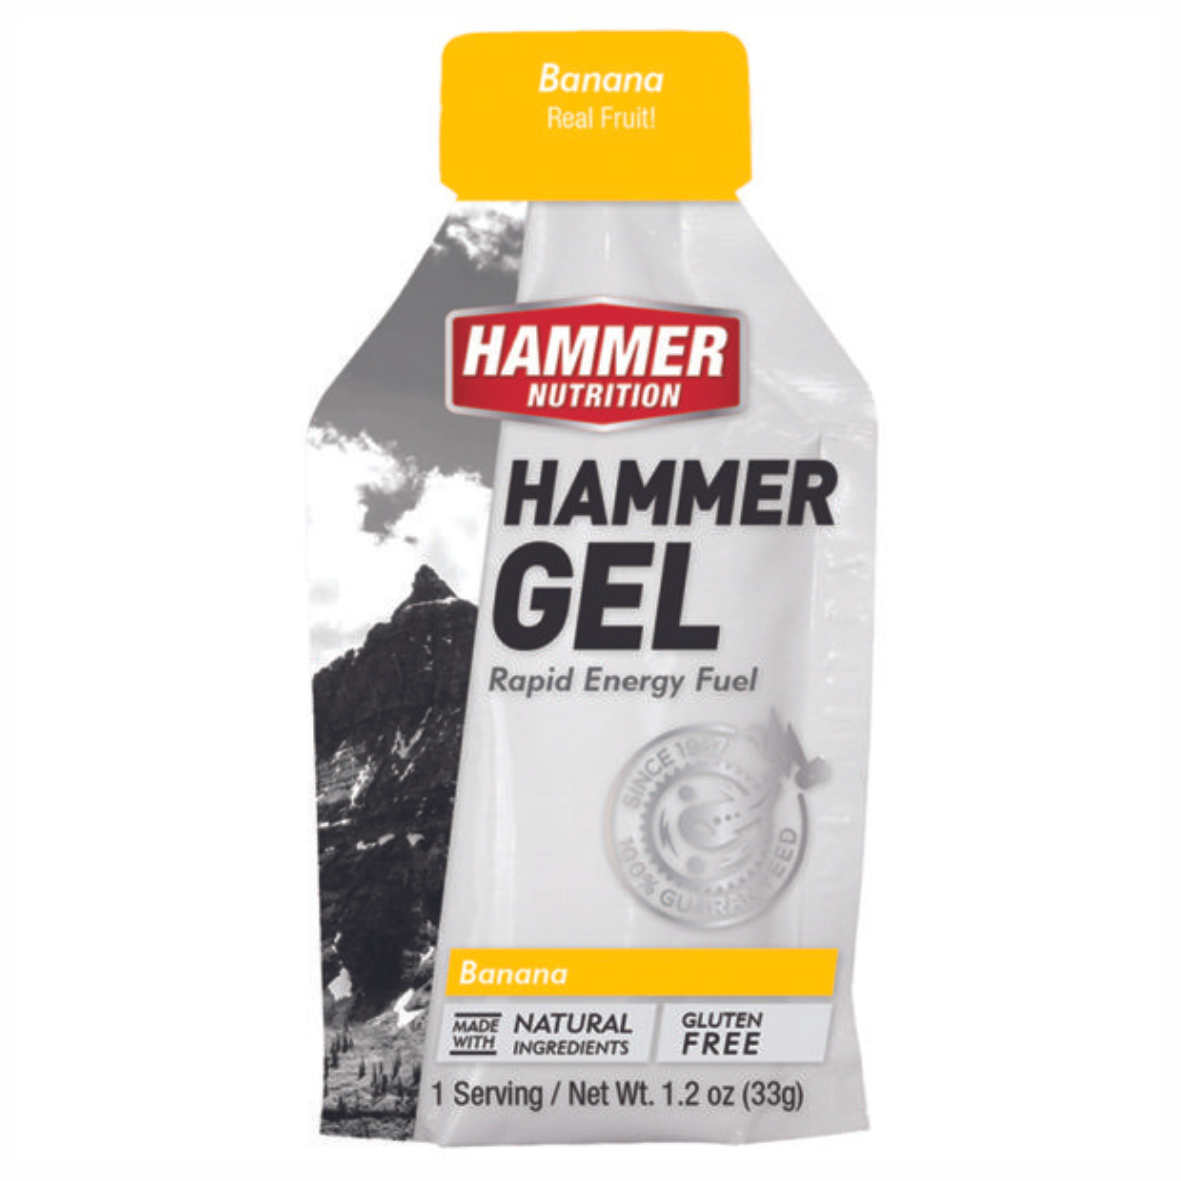 Hammer Nutrition Energy Gels in Banana flavour